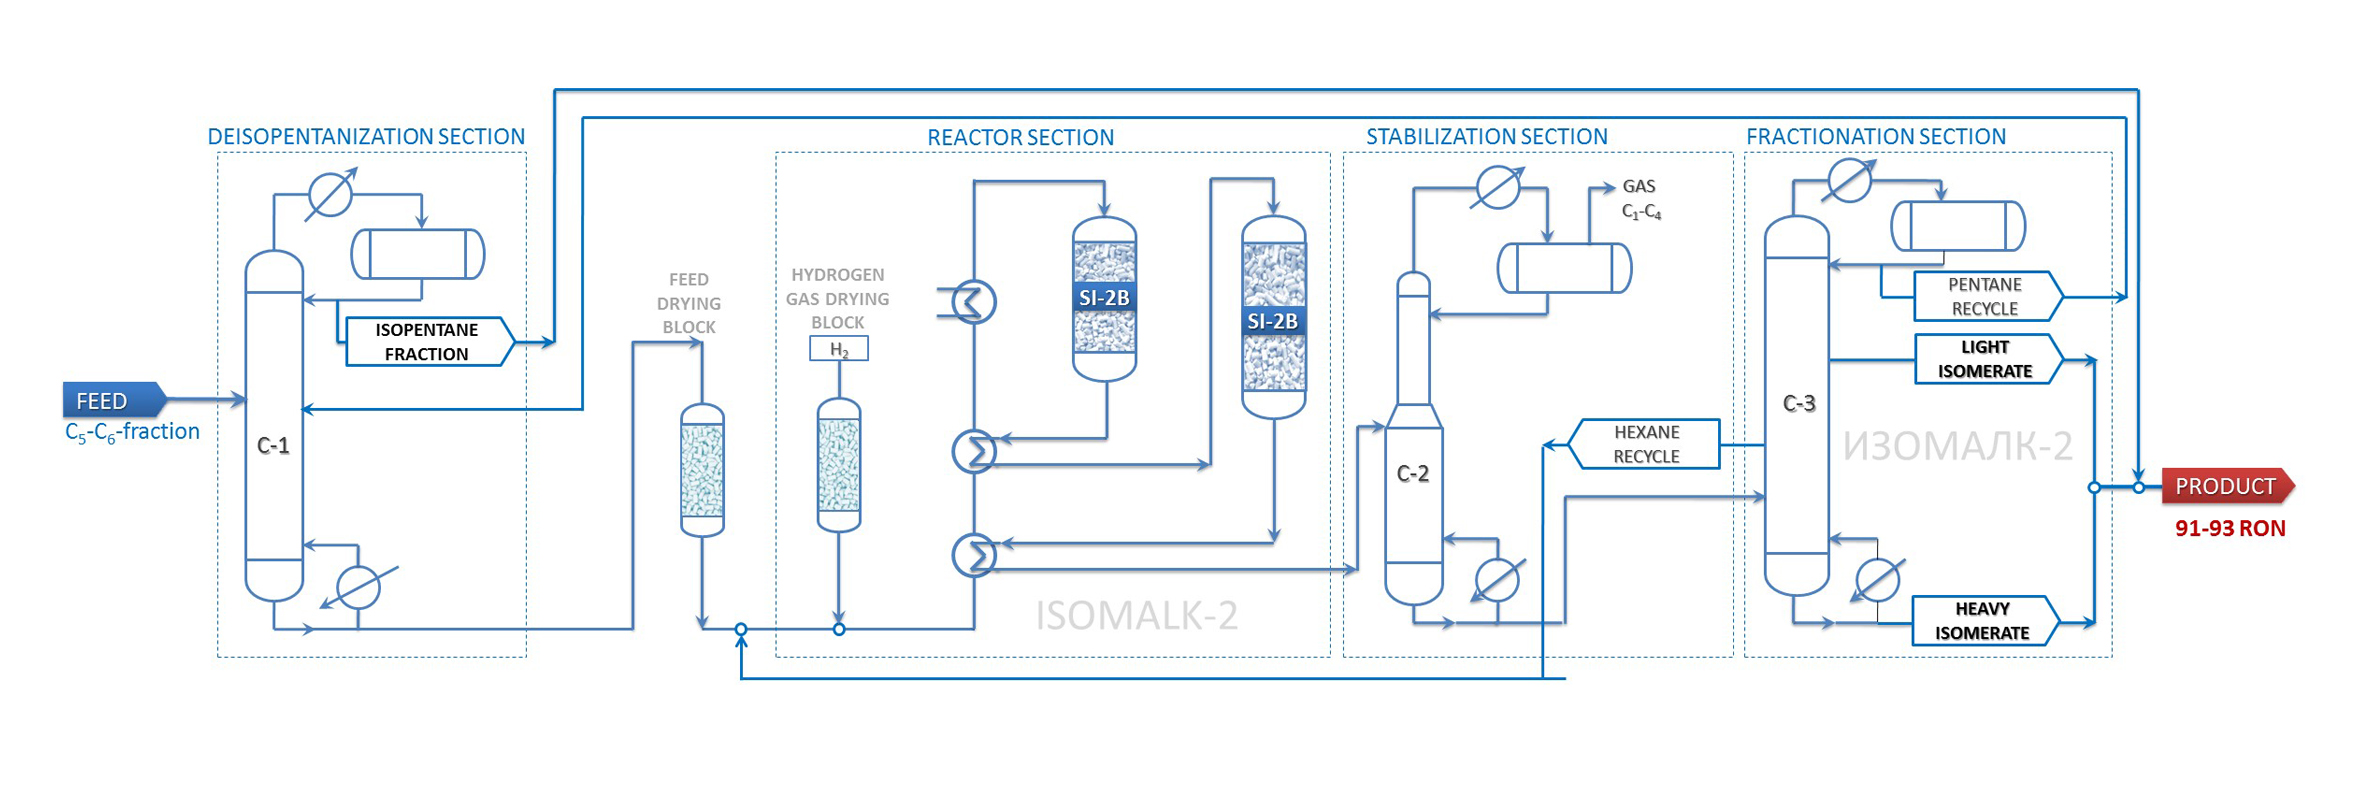 Isomalk-2 Unit PFD for use in units designed for a chlorinated system (with catalyst drop-in replacement)